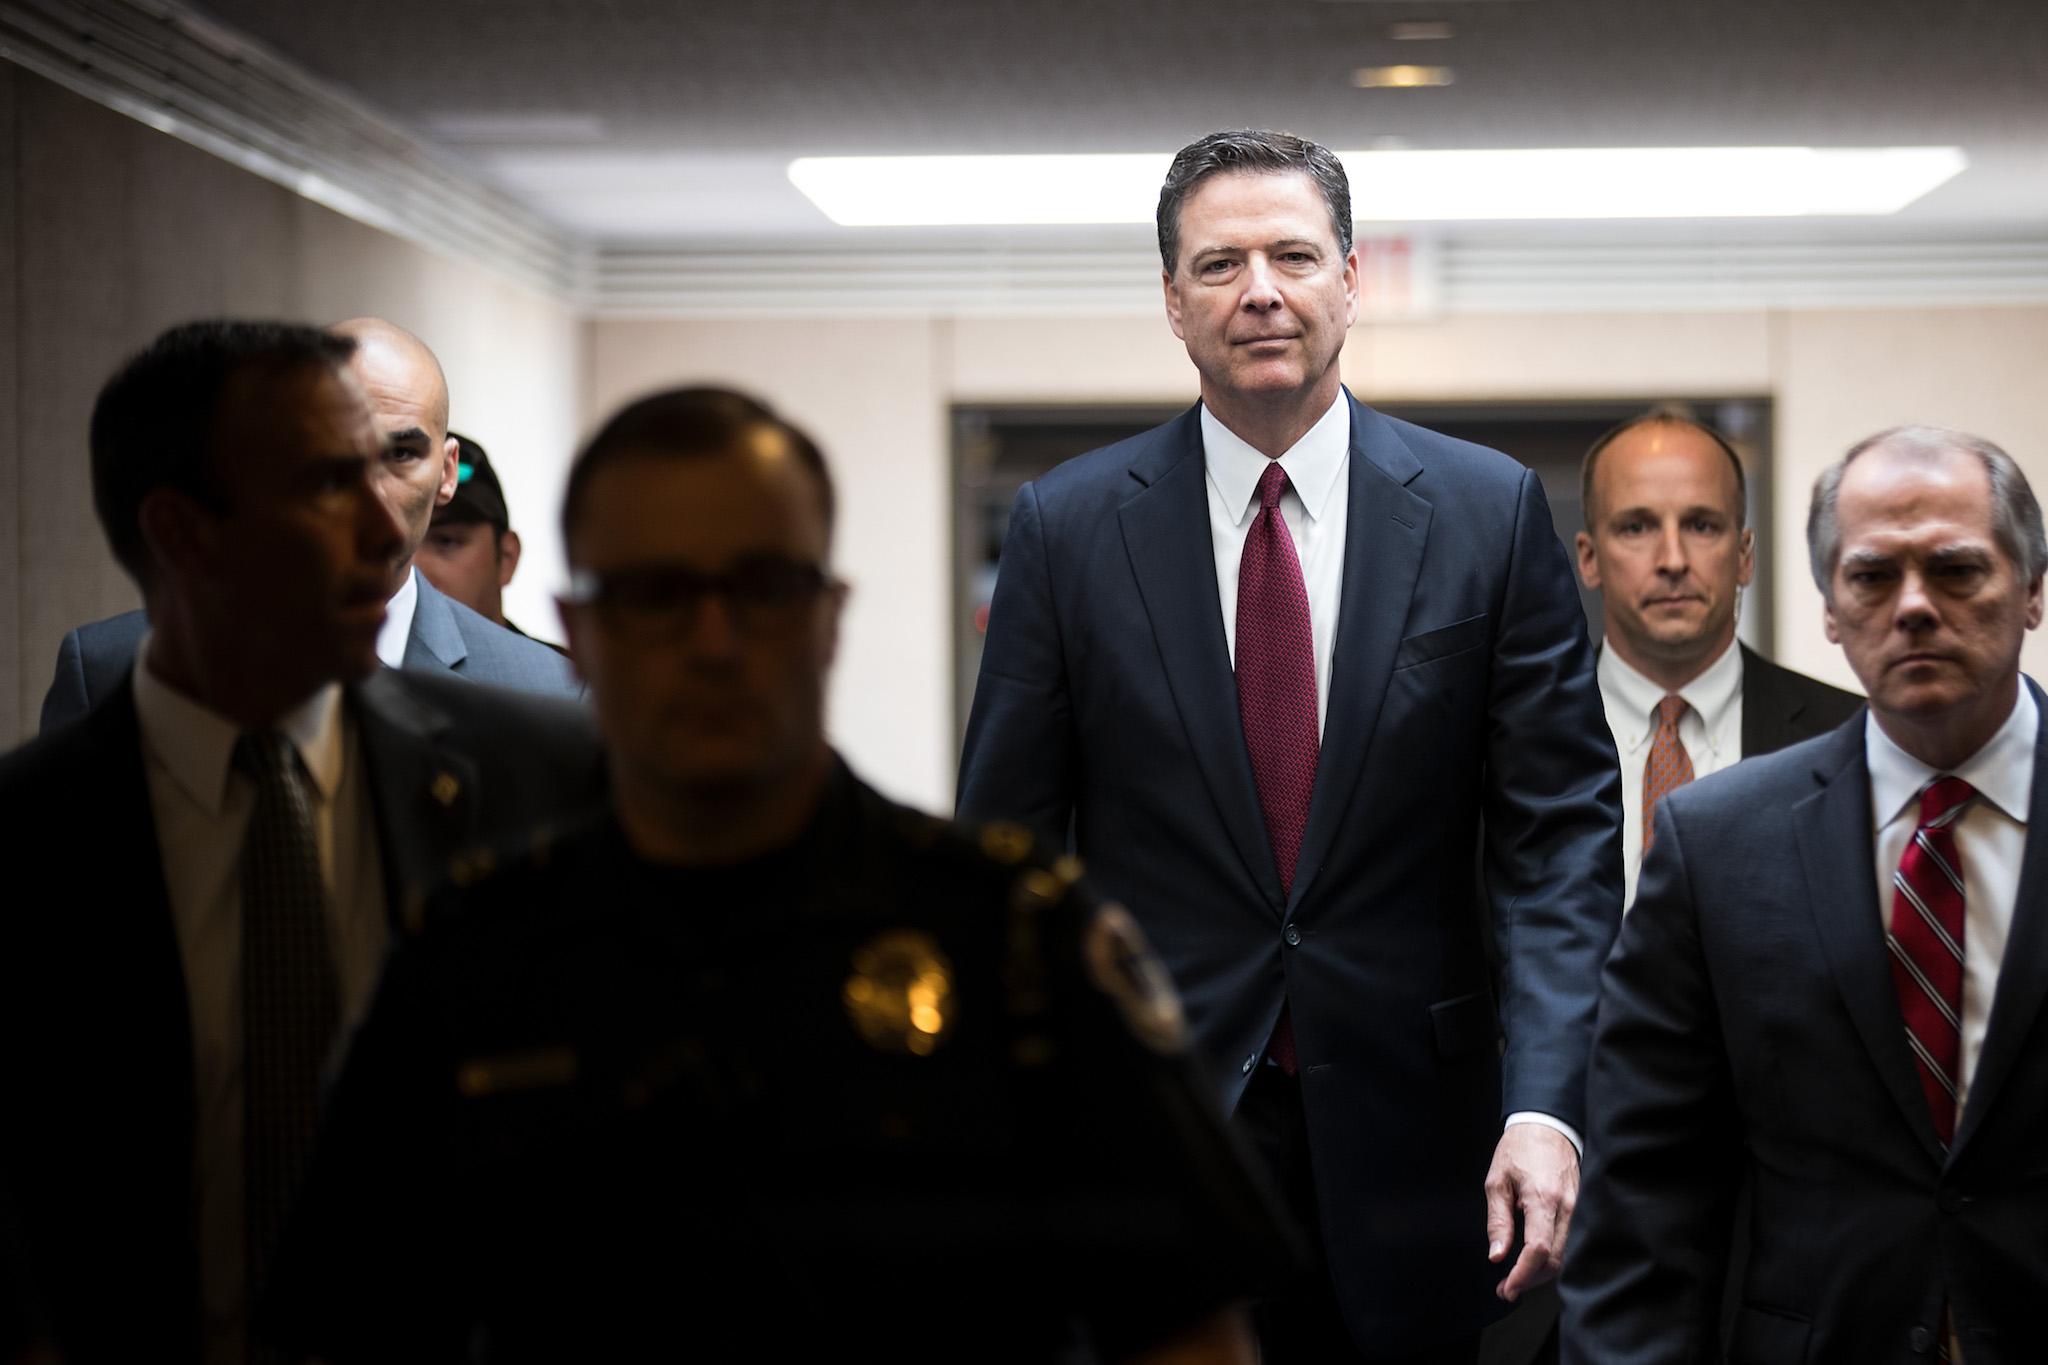 Comey's book is expected to cover his experience handling the FBI investigation into alleged ties between Trump and Russia